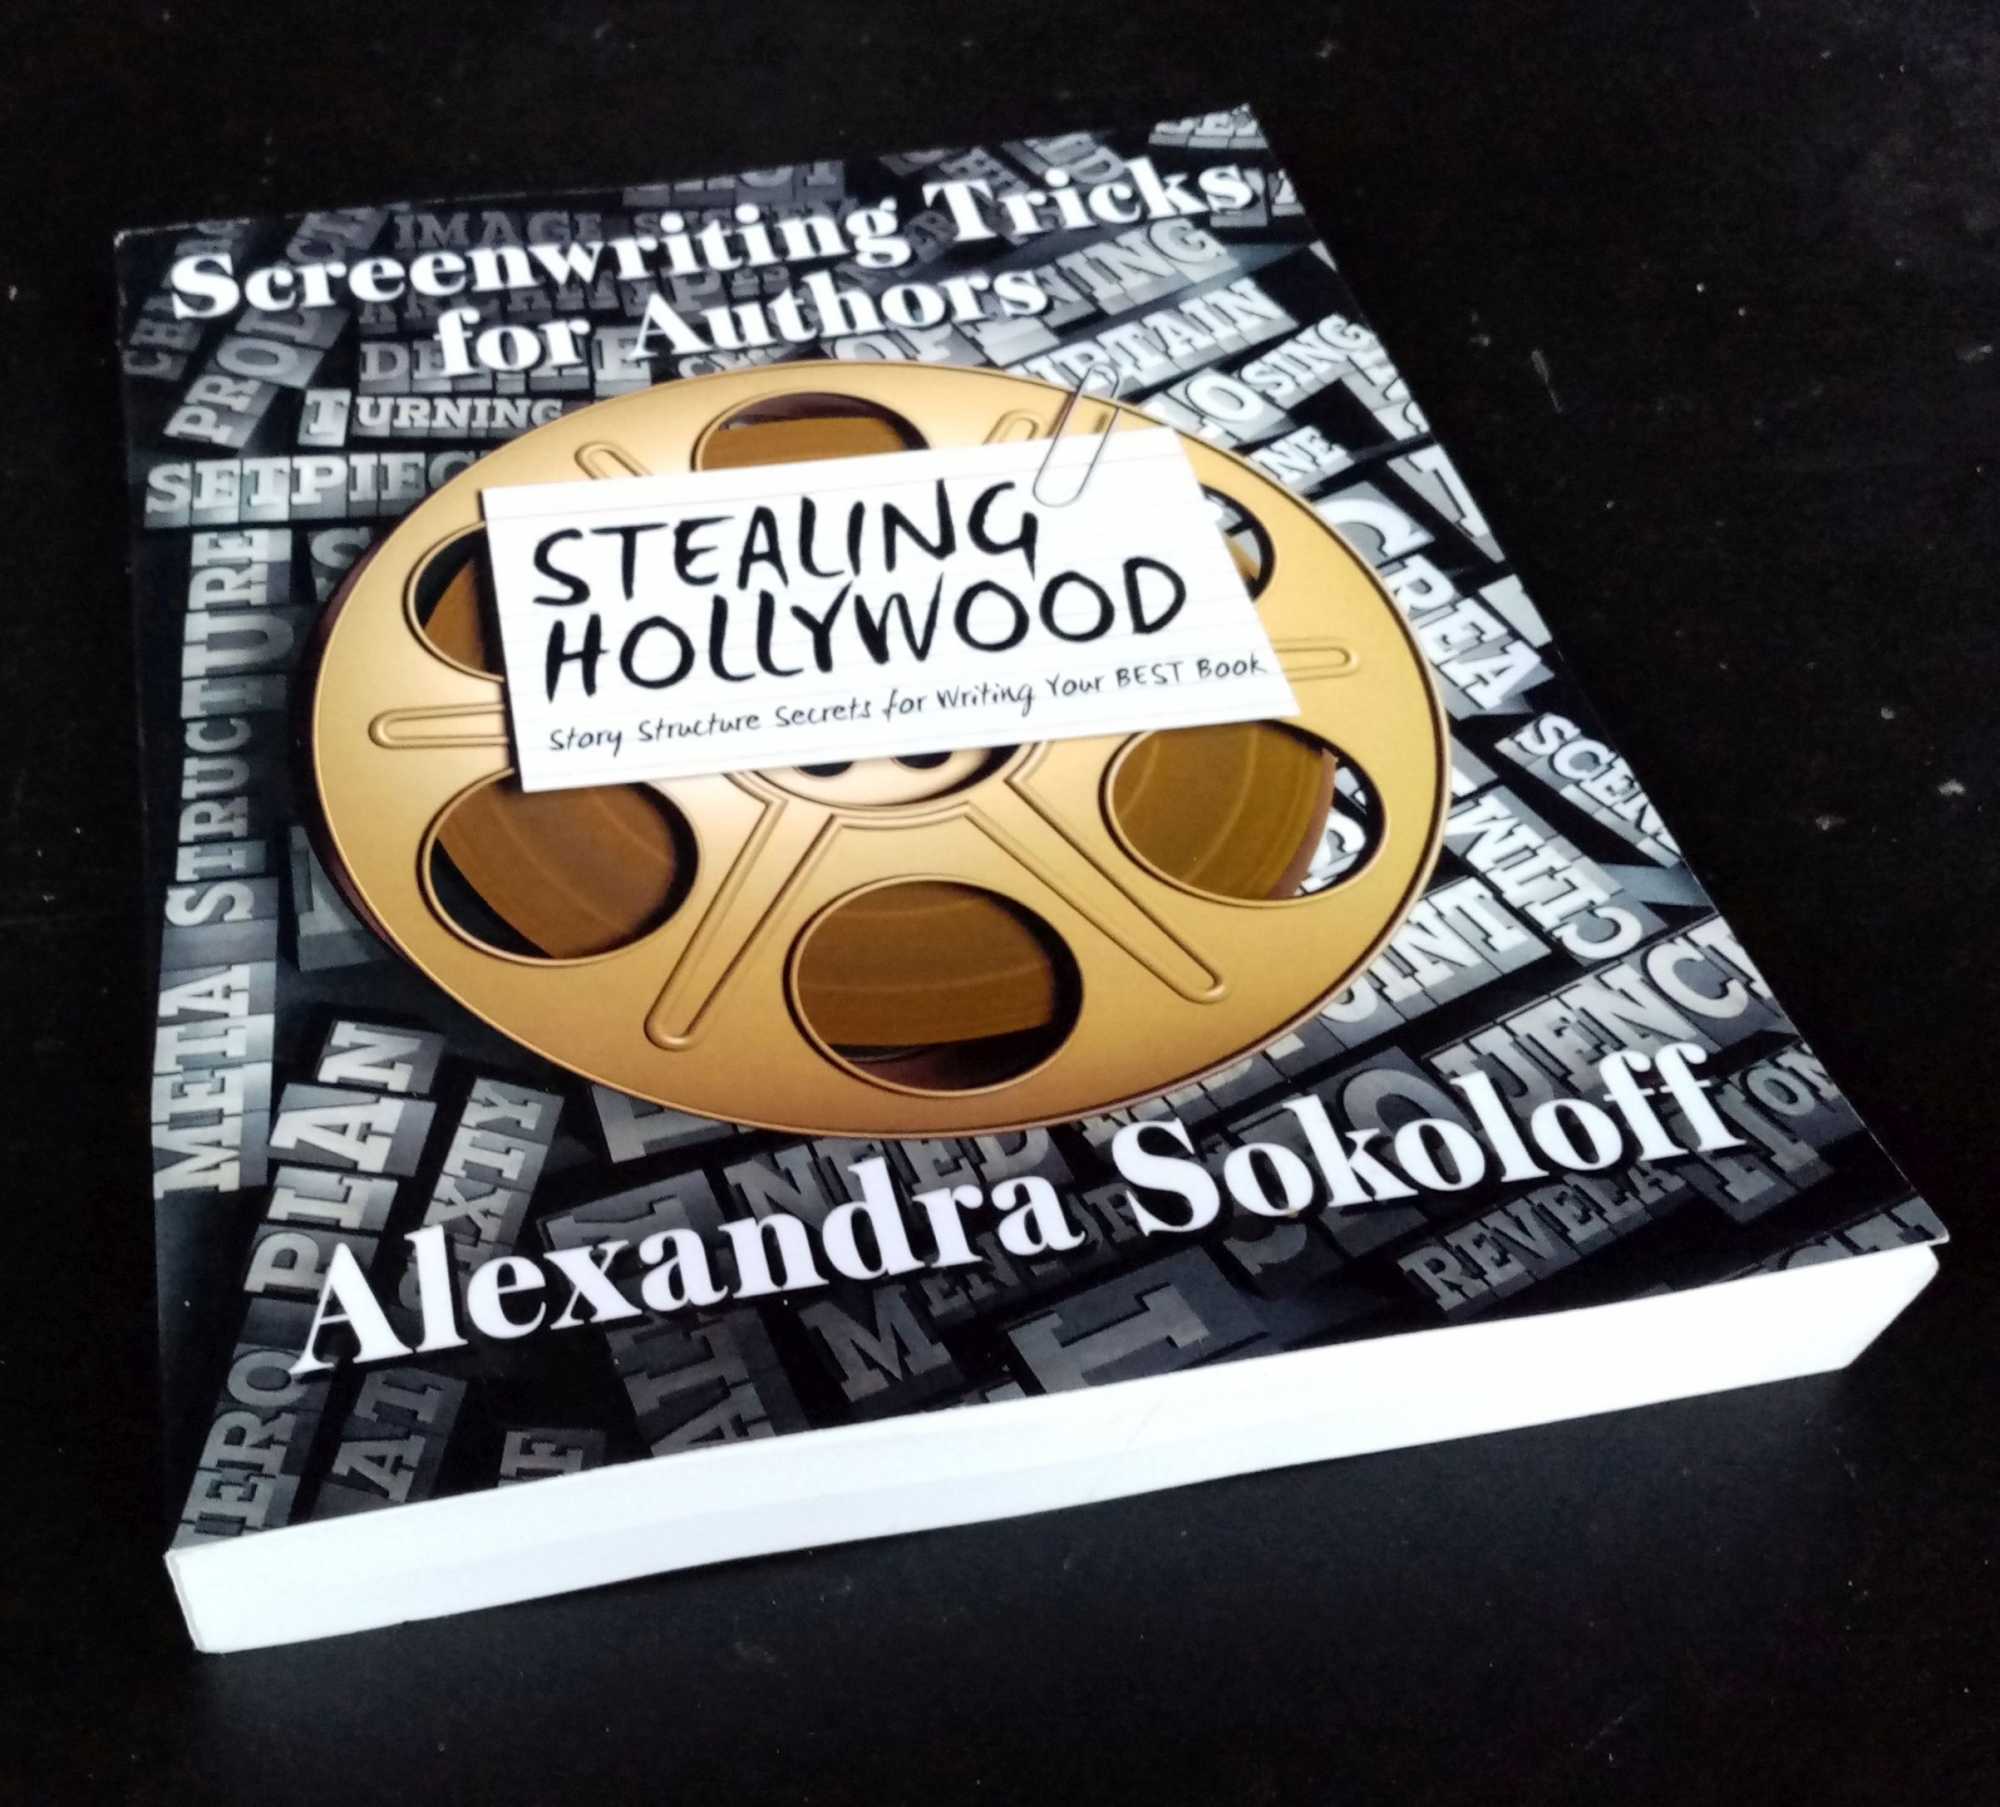 Alexandra Sokoloff - Screenwriting Tricks for Authors (and Screenwriters!): STEALING HOLLYWOOD: Story structure secrets for writing your BEST book